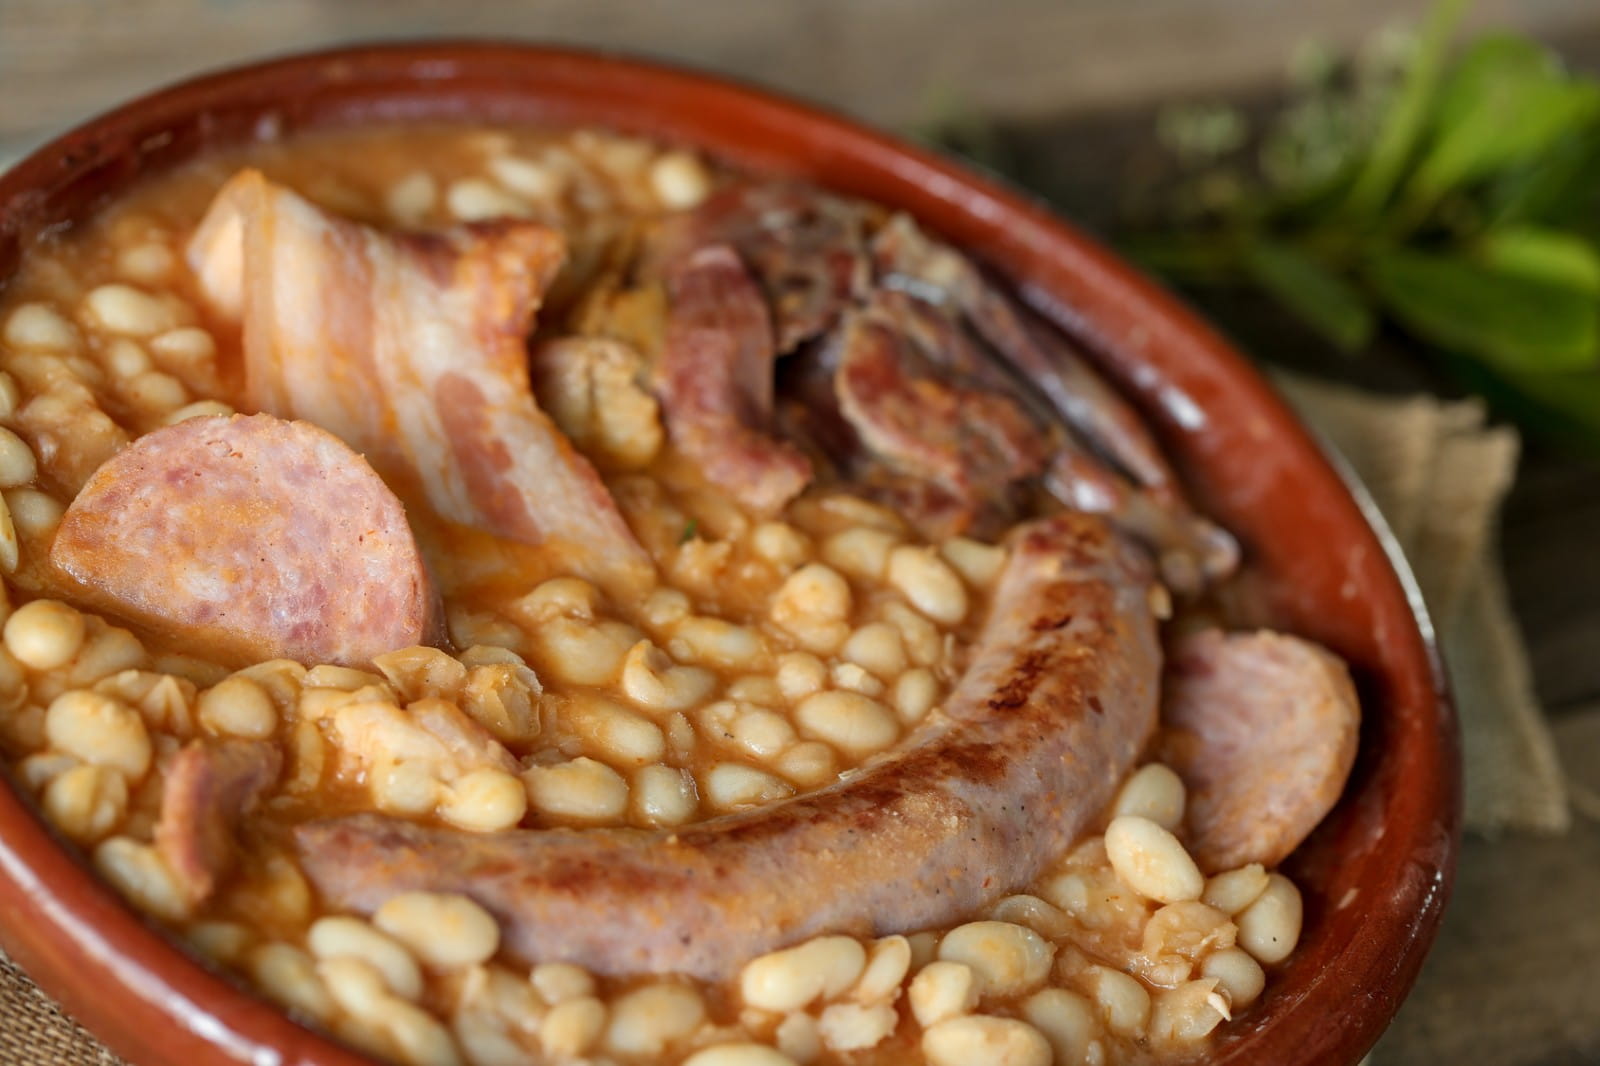 Six of the best wine pairings with cassoulet